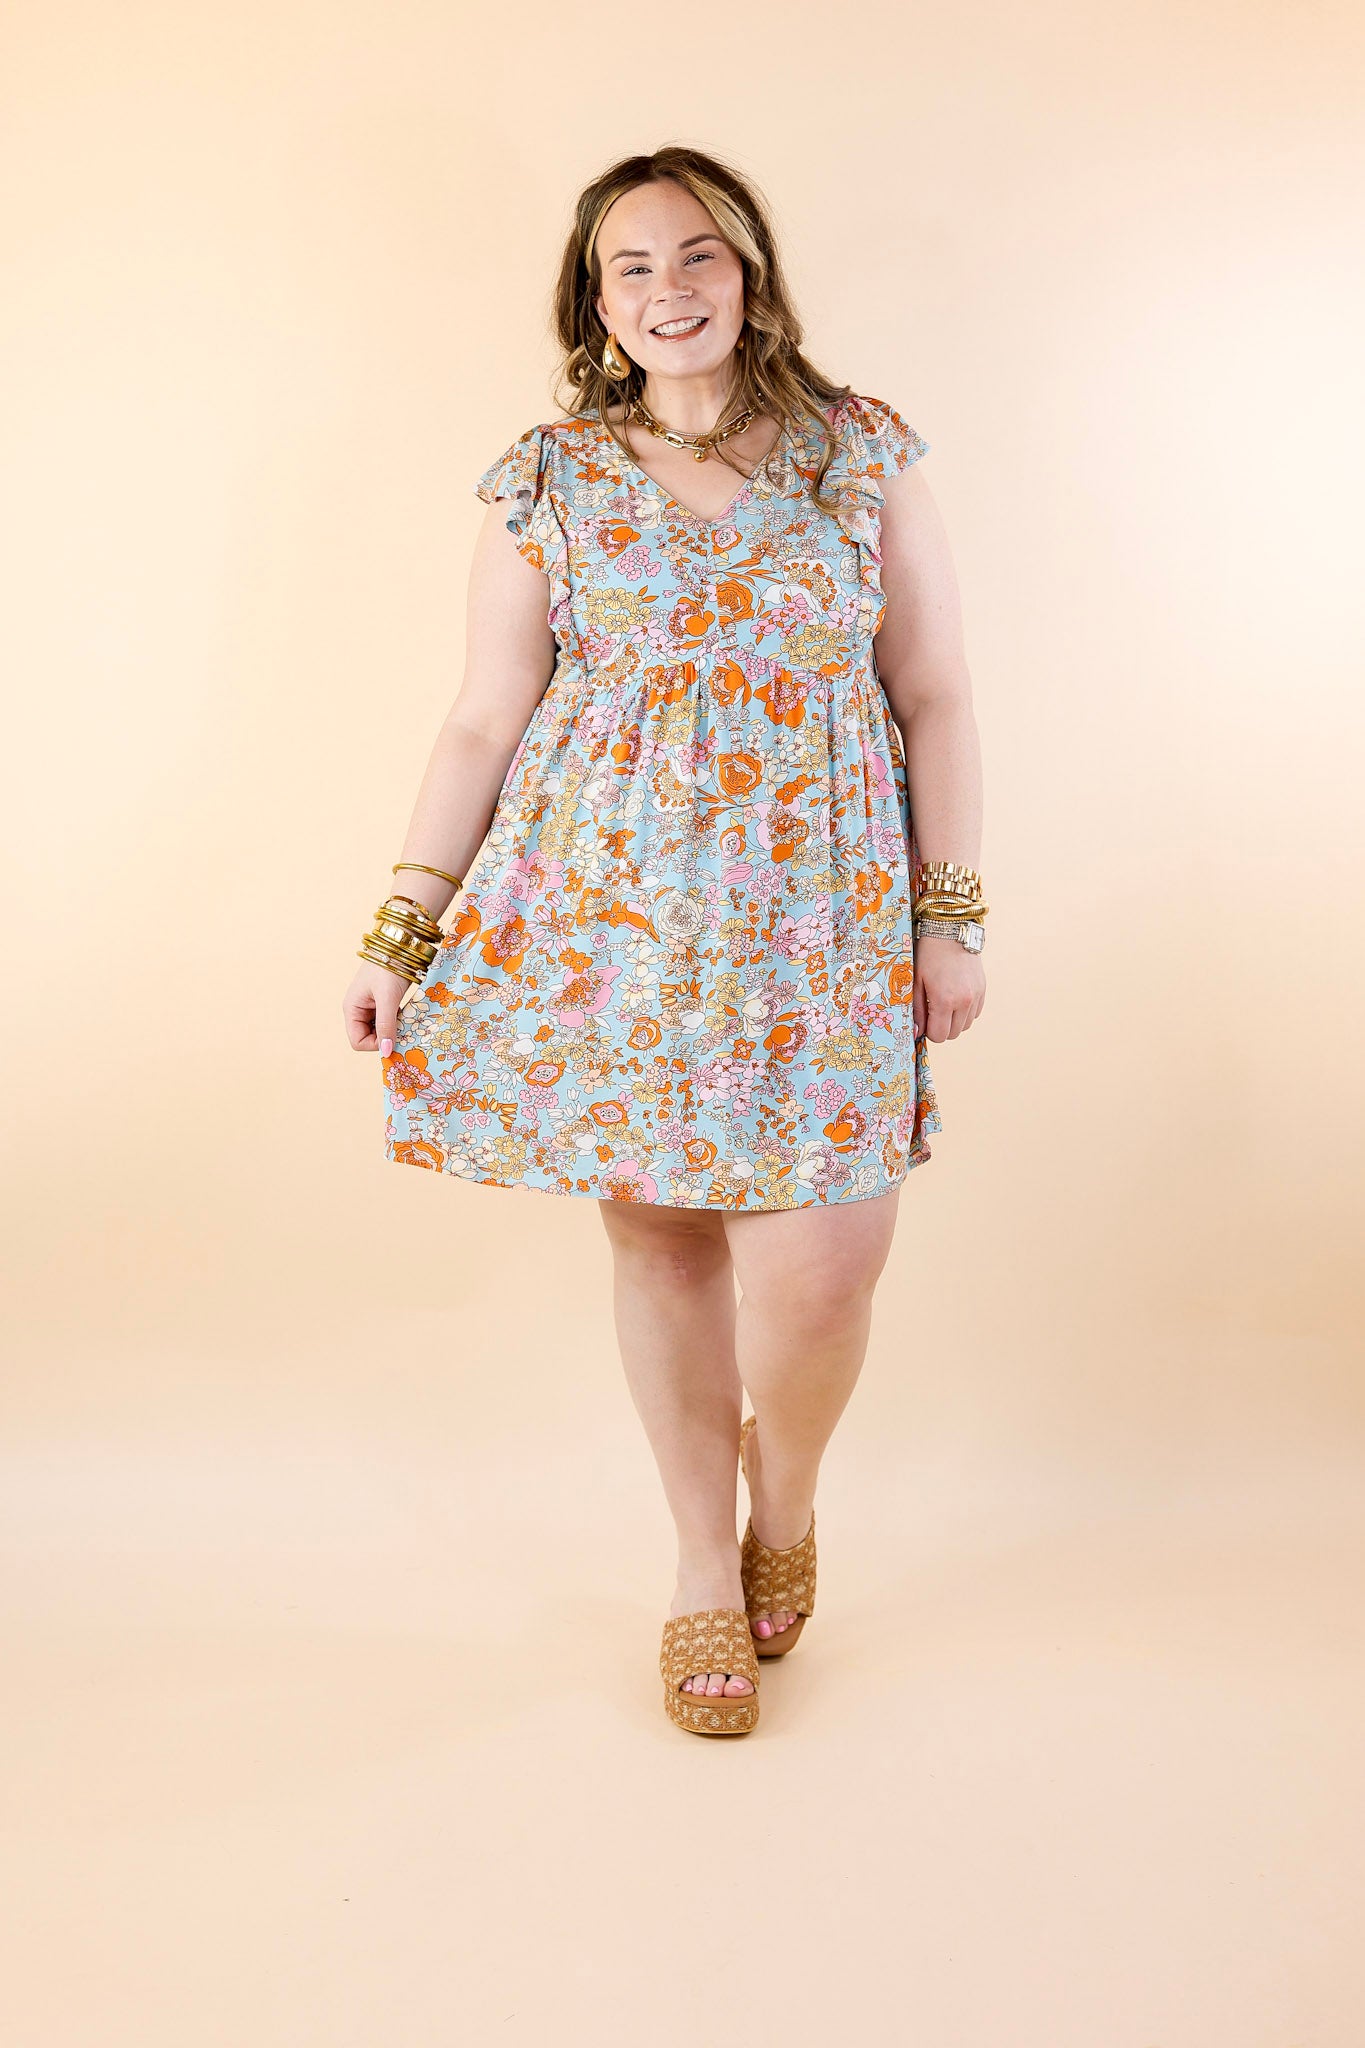 Sunshine On My Mind Floral Ruffle Cap Sleeve Dress in Light Blue - Giddy Up Glamour Boutique